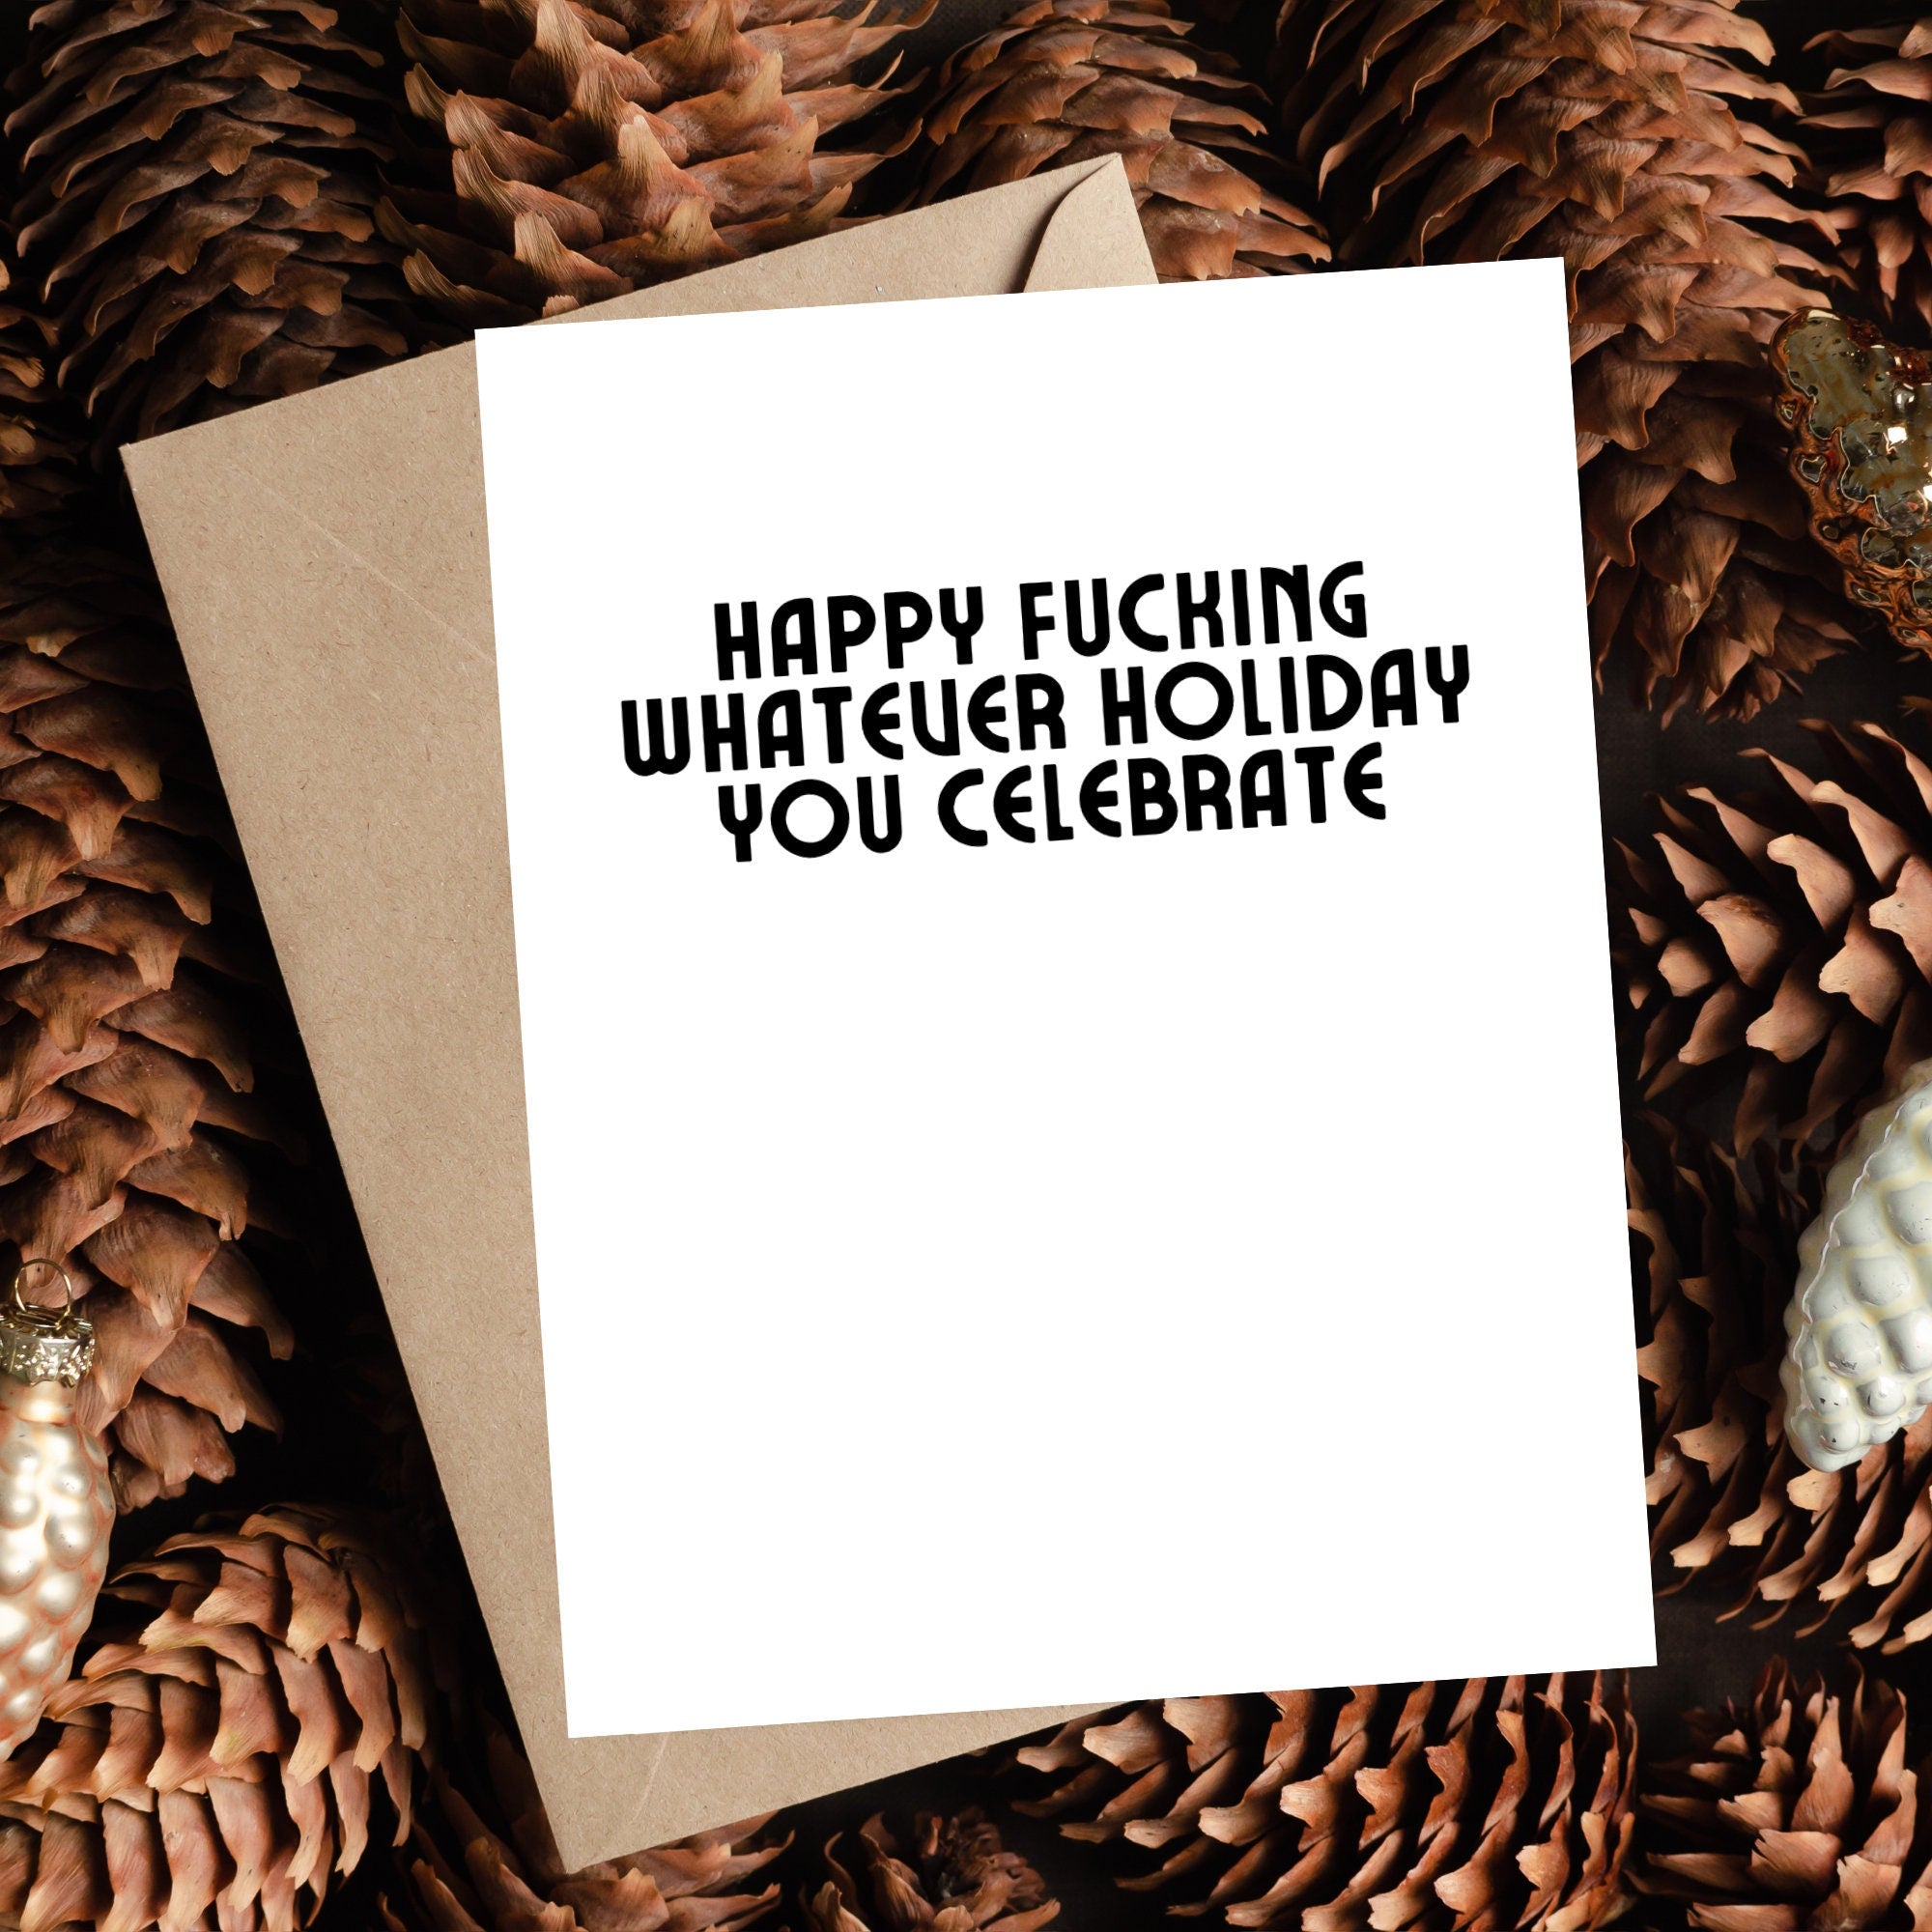 Happy Fucking Whatever Holiday You Celebrate Card